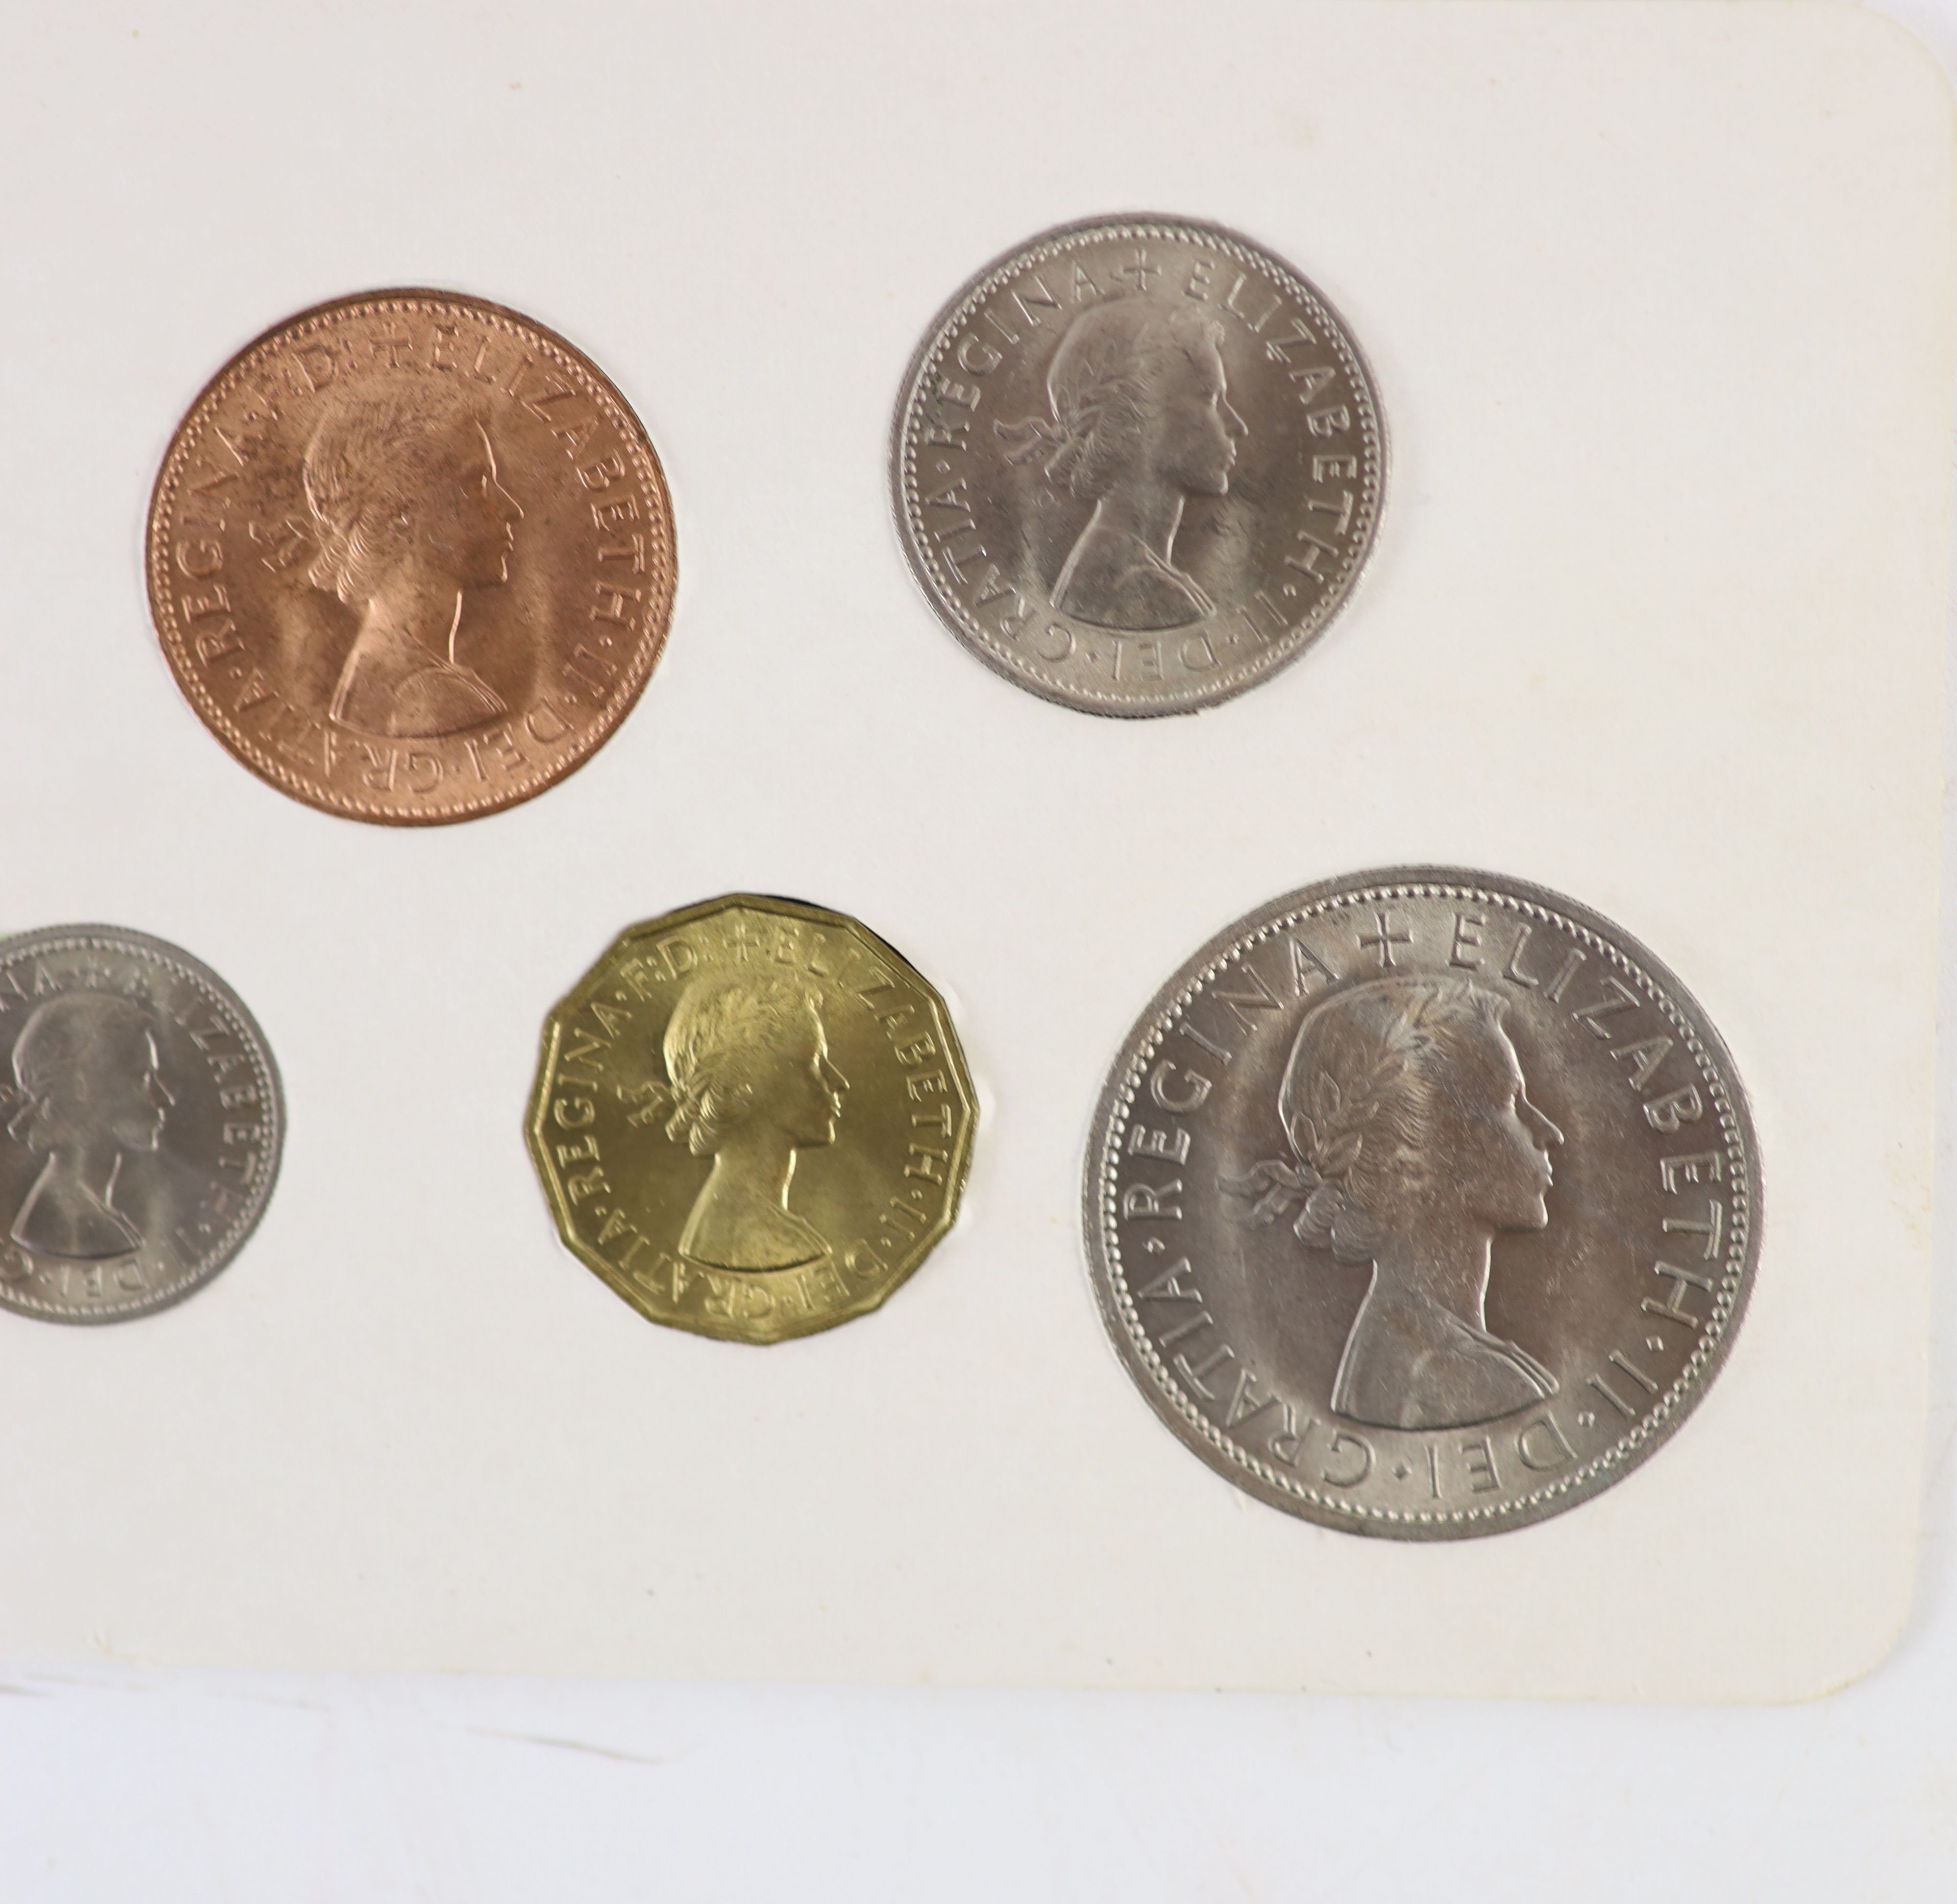 Queen Elizabeth II pre-decimal specimen coin sets for 1953 - 1967, first and second issues, all EF/ - Image 7 of 34